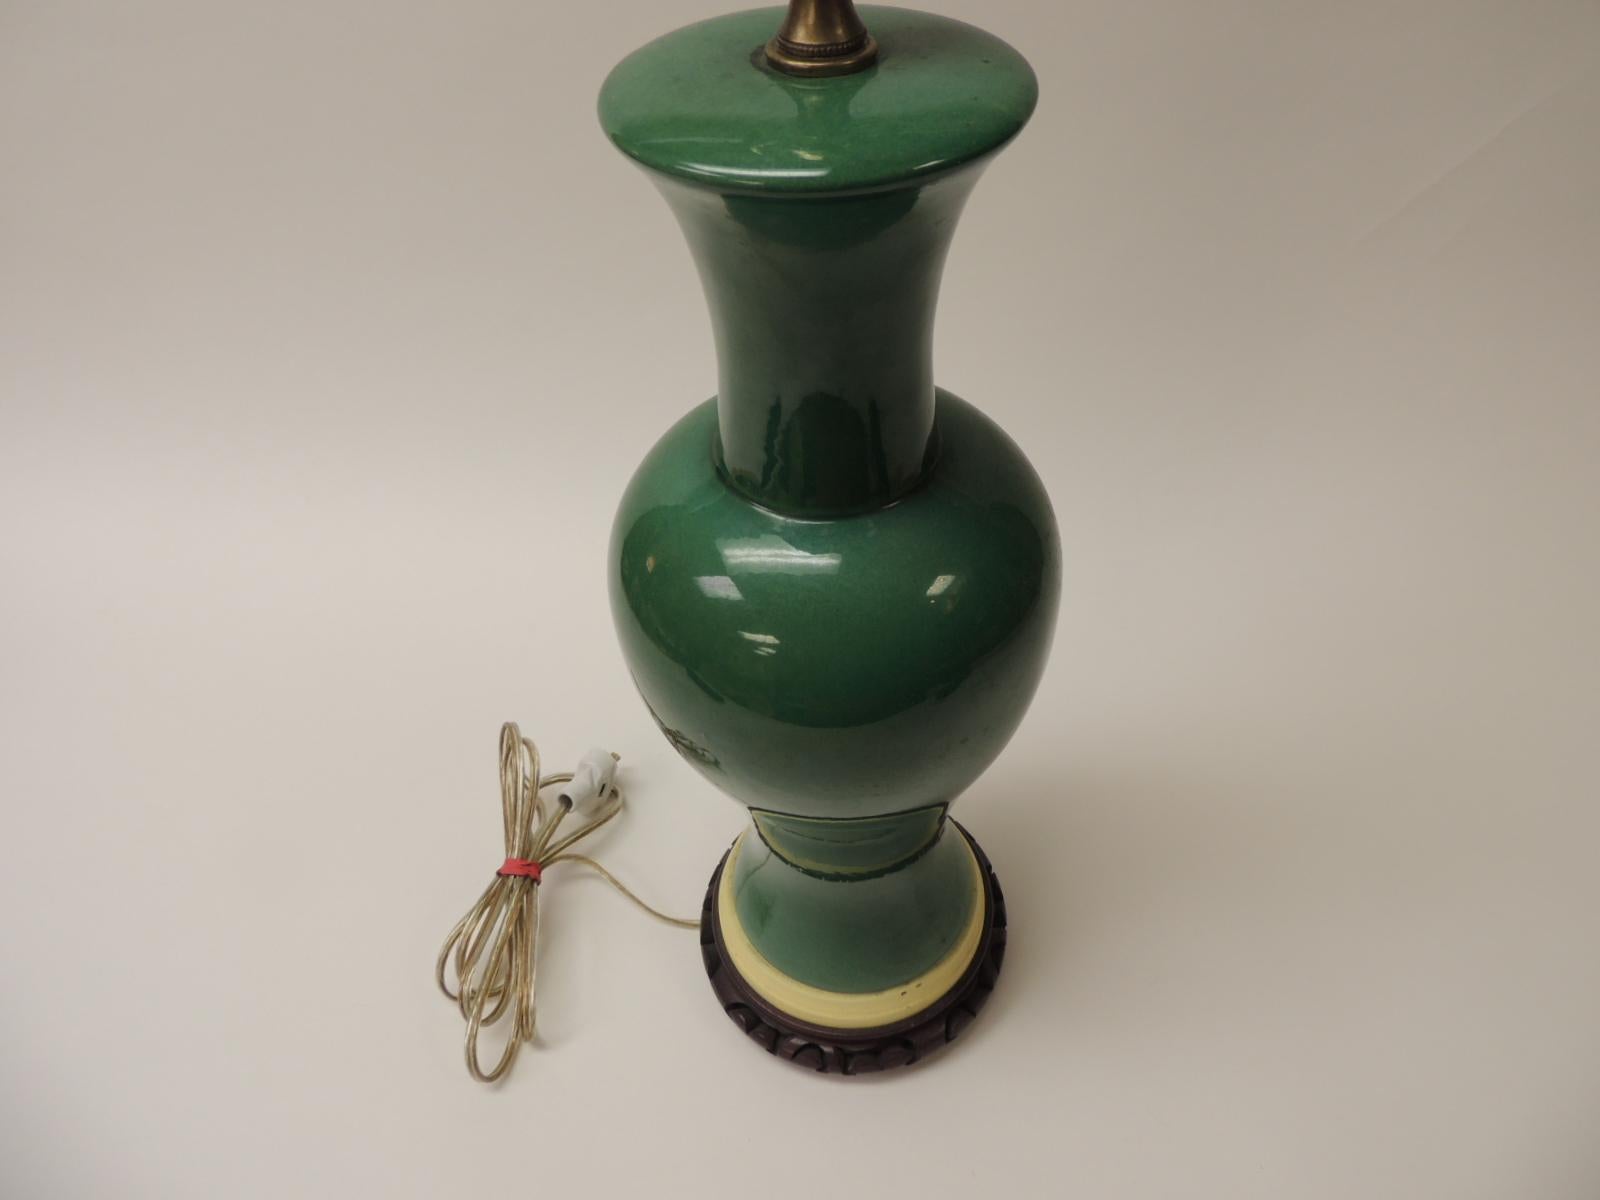 Asian ginger jar shape green vintage ceramic lamp with brass fittings (no harp or lamp shade)
Sits on a painted brass base and a carved wood base.
Size: 23 H x 6D, 
1970s, Asia.
  